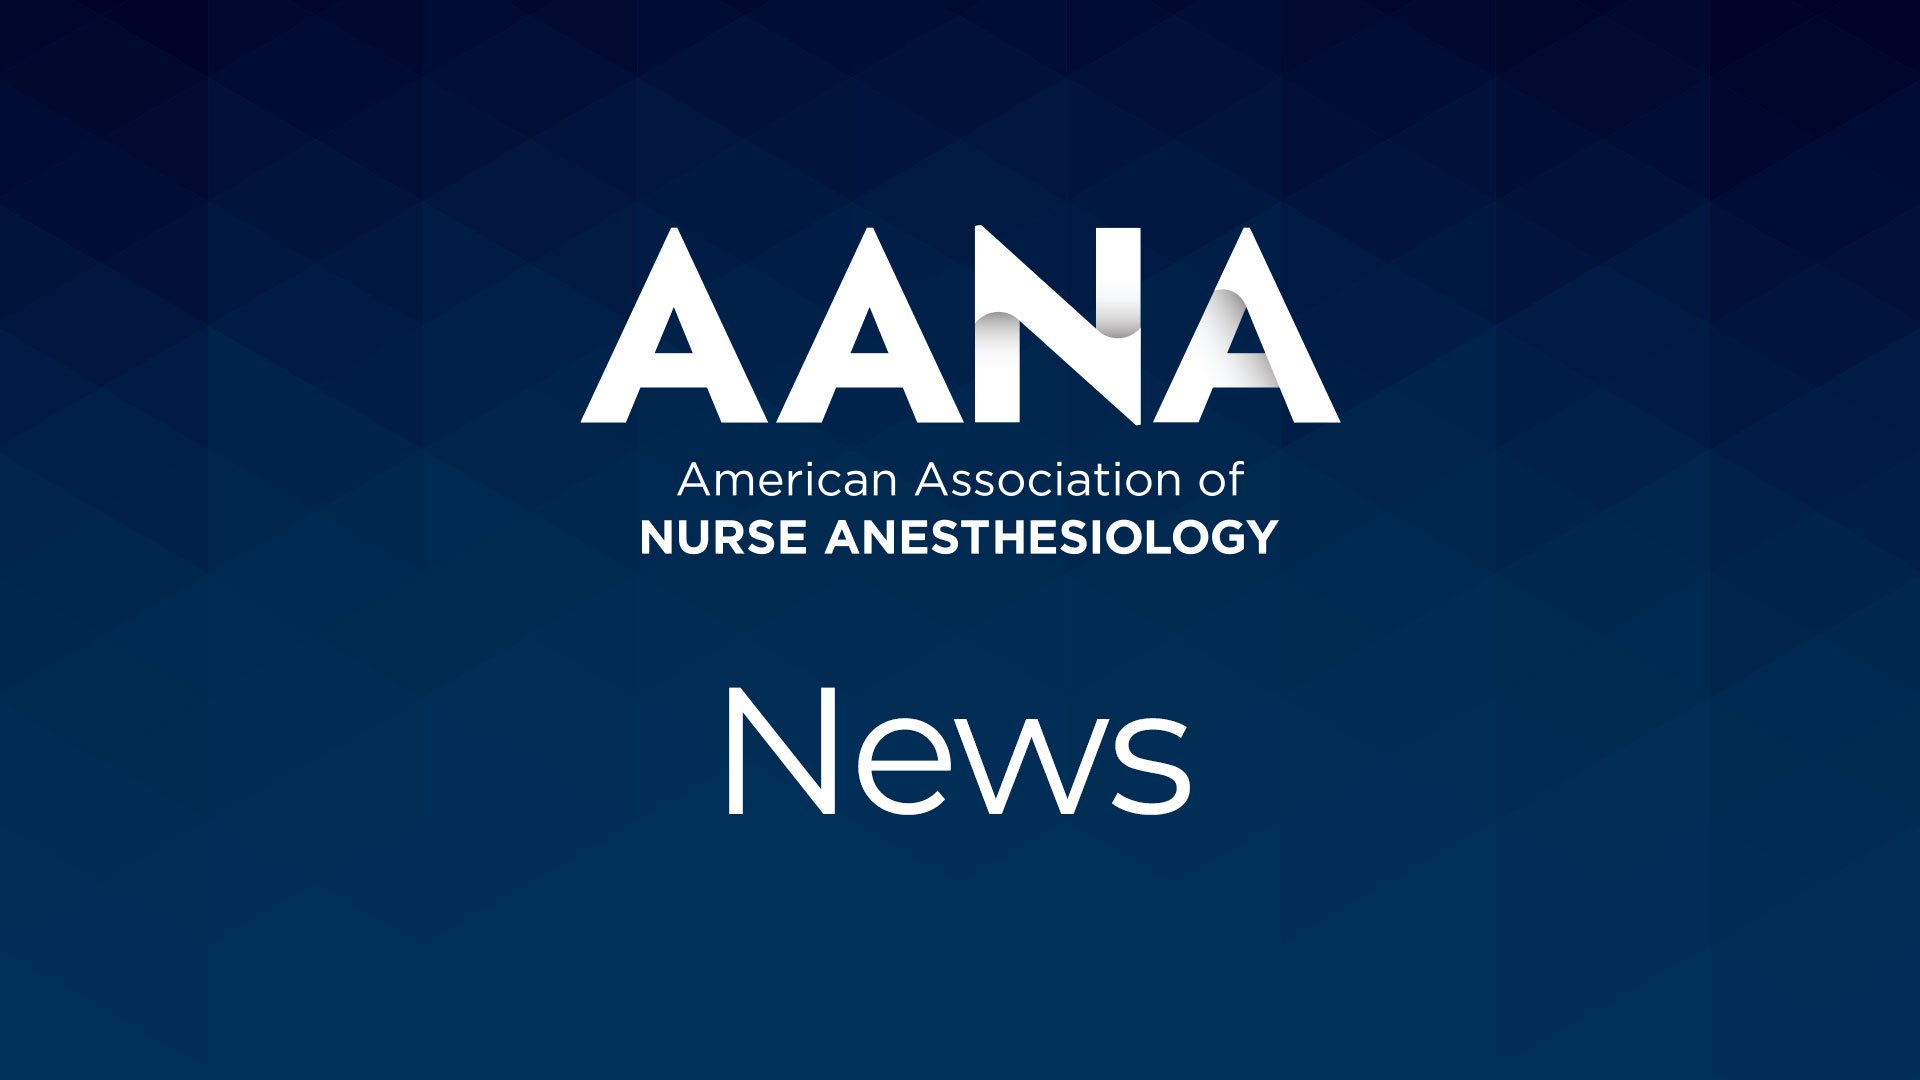 Conference for RRNAs sets residents up for success AANA American Association of Nurse